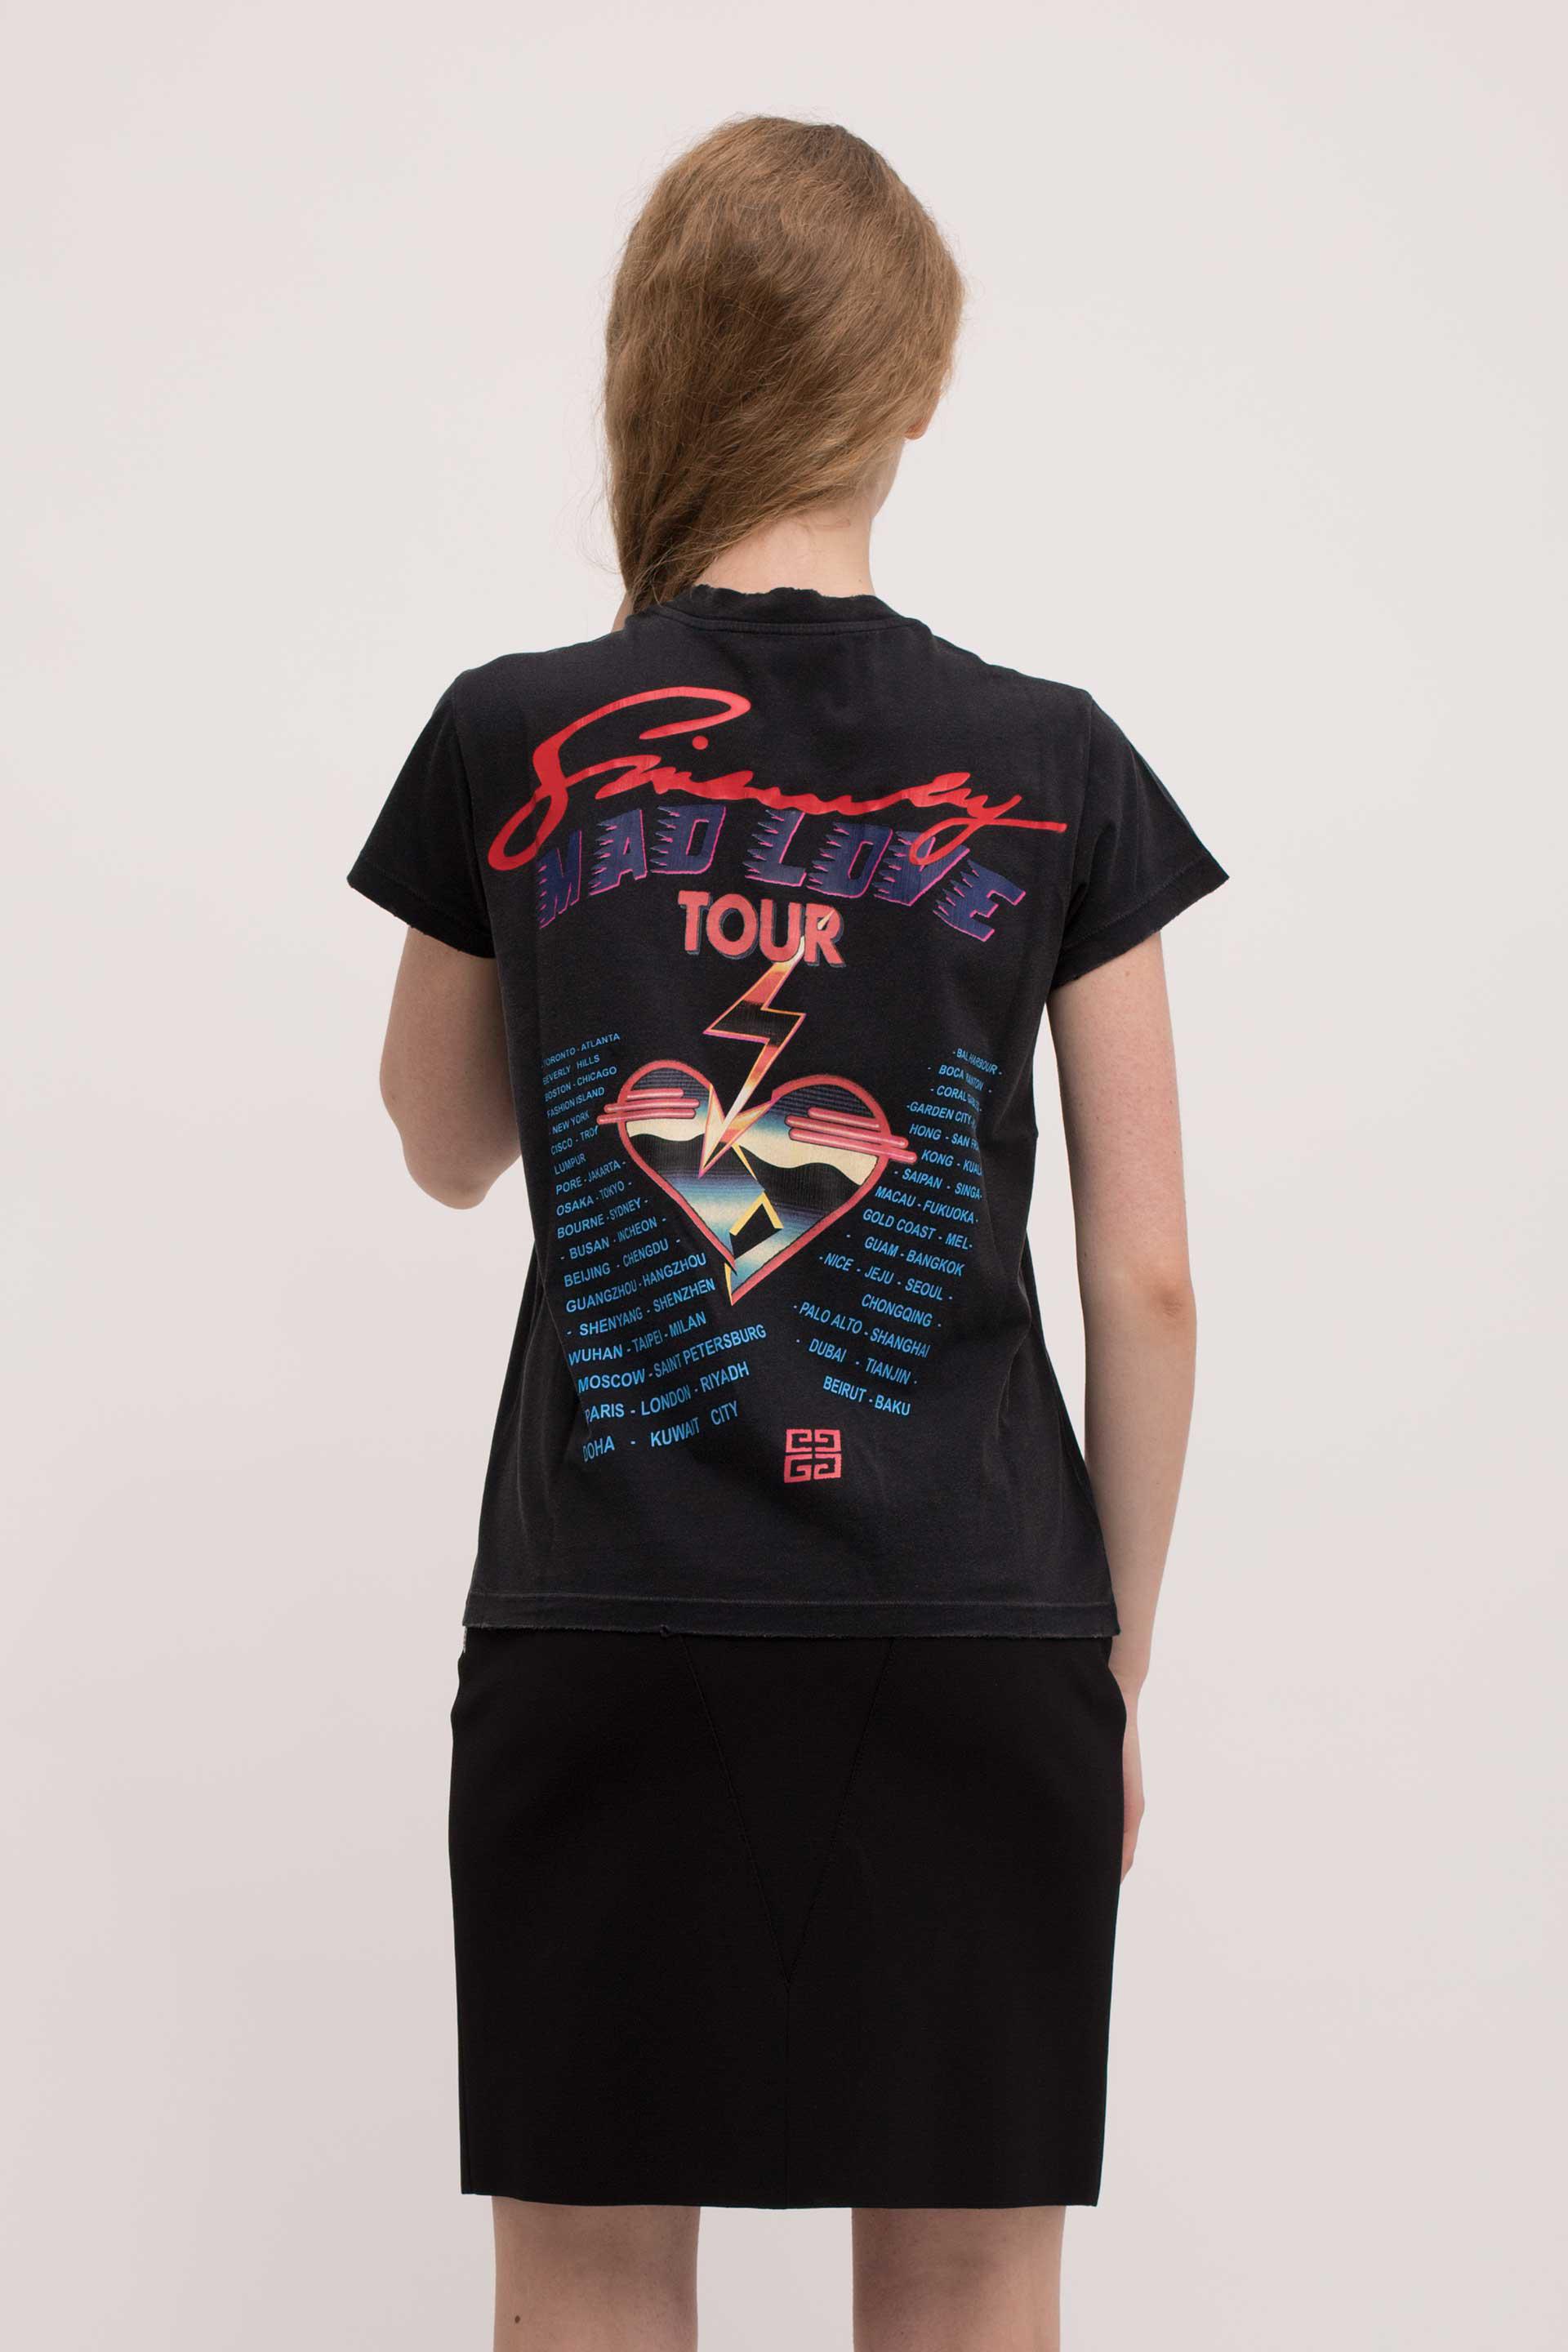 mad love tour givenchy